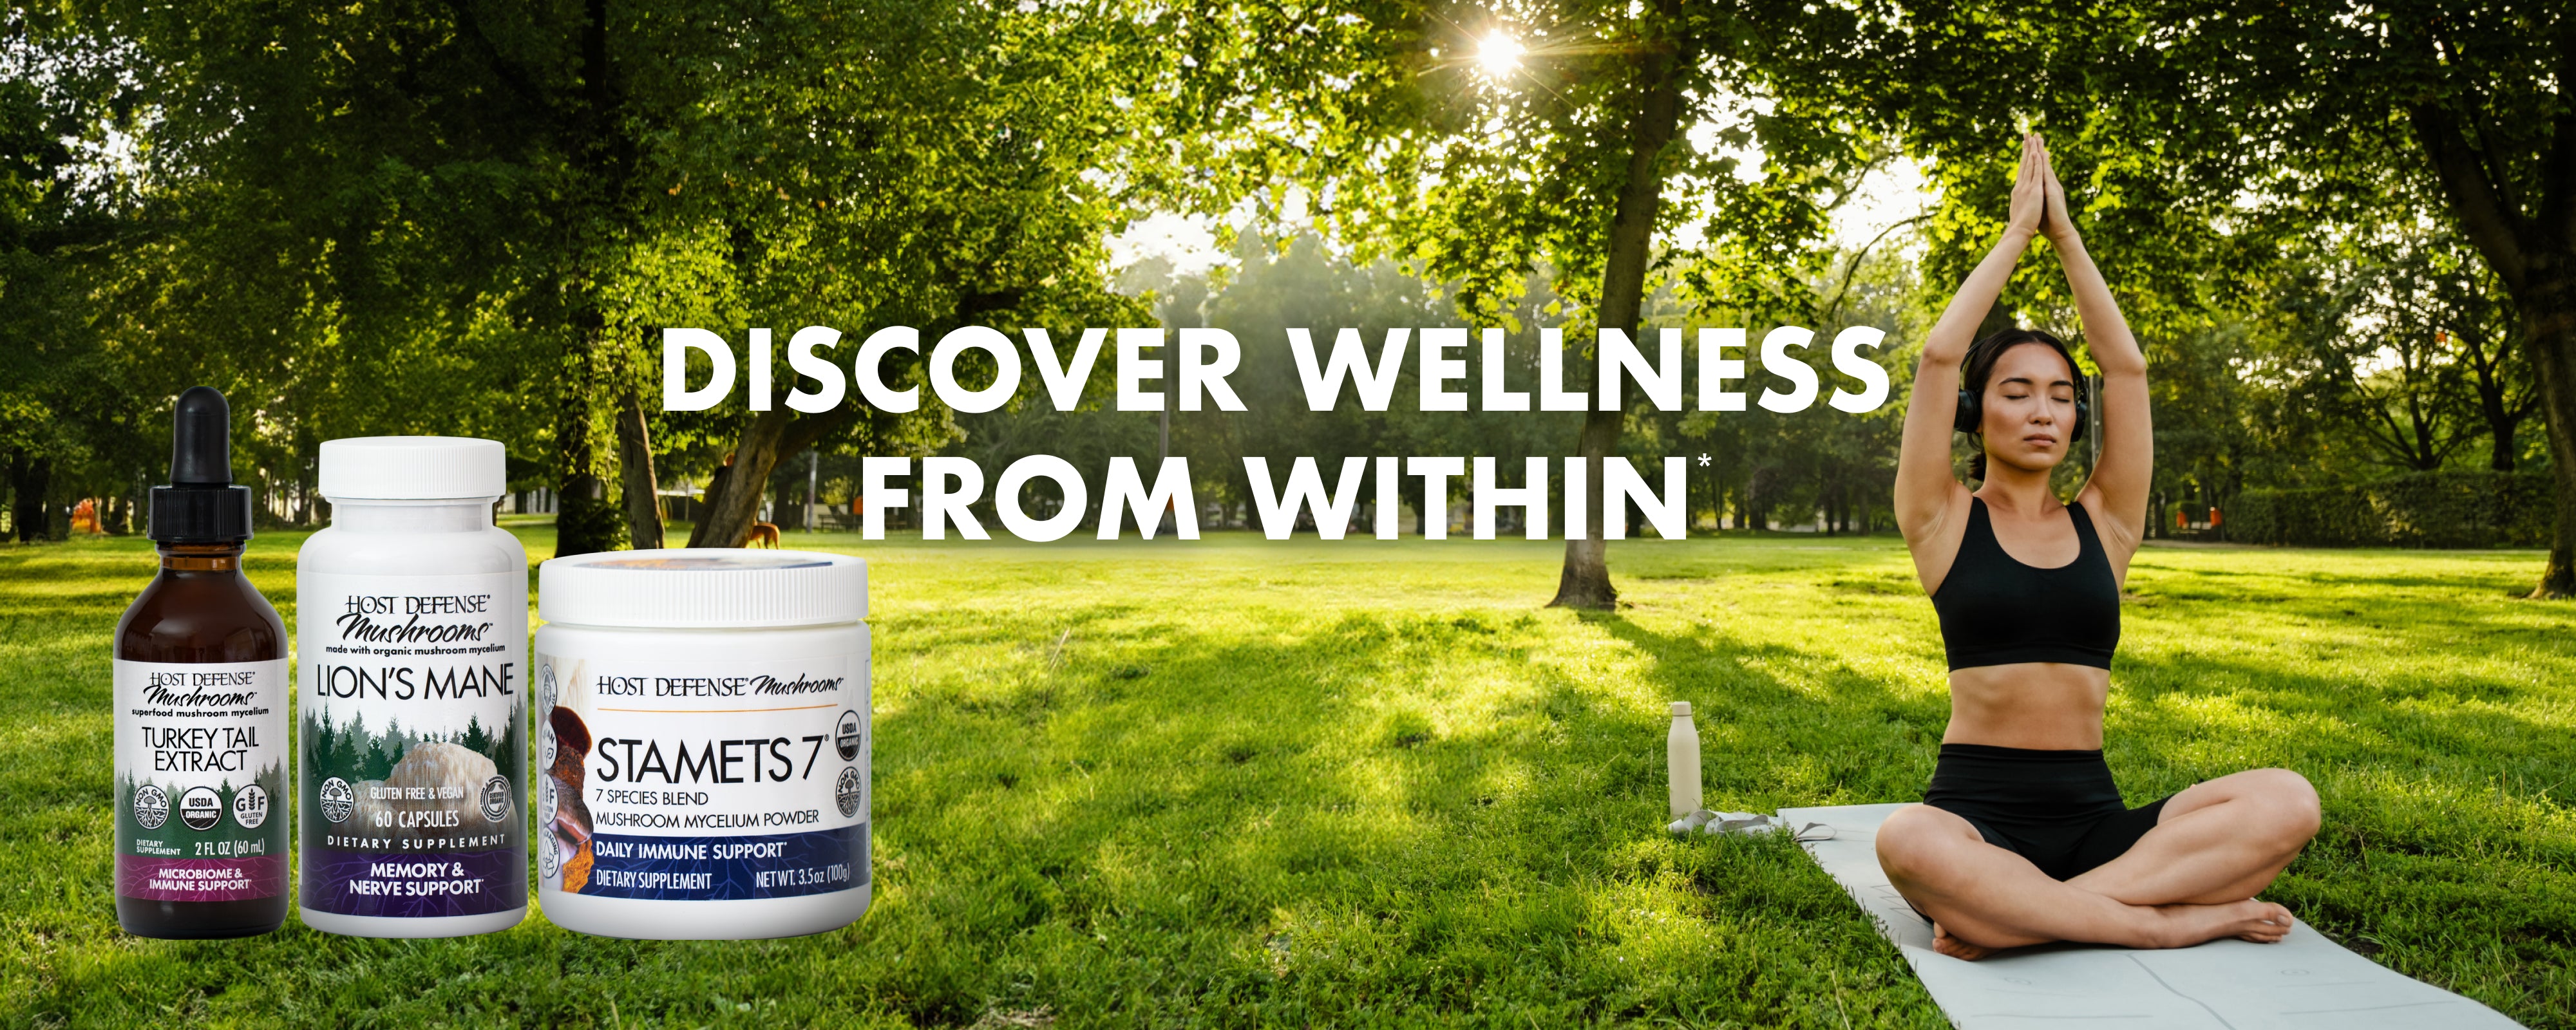 discover wellness from within